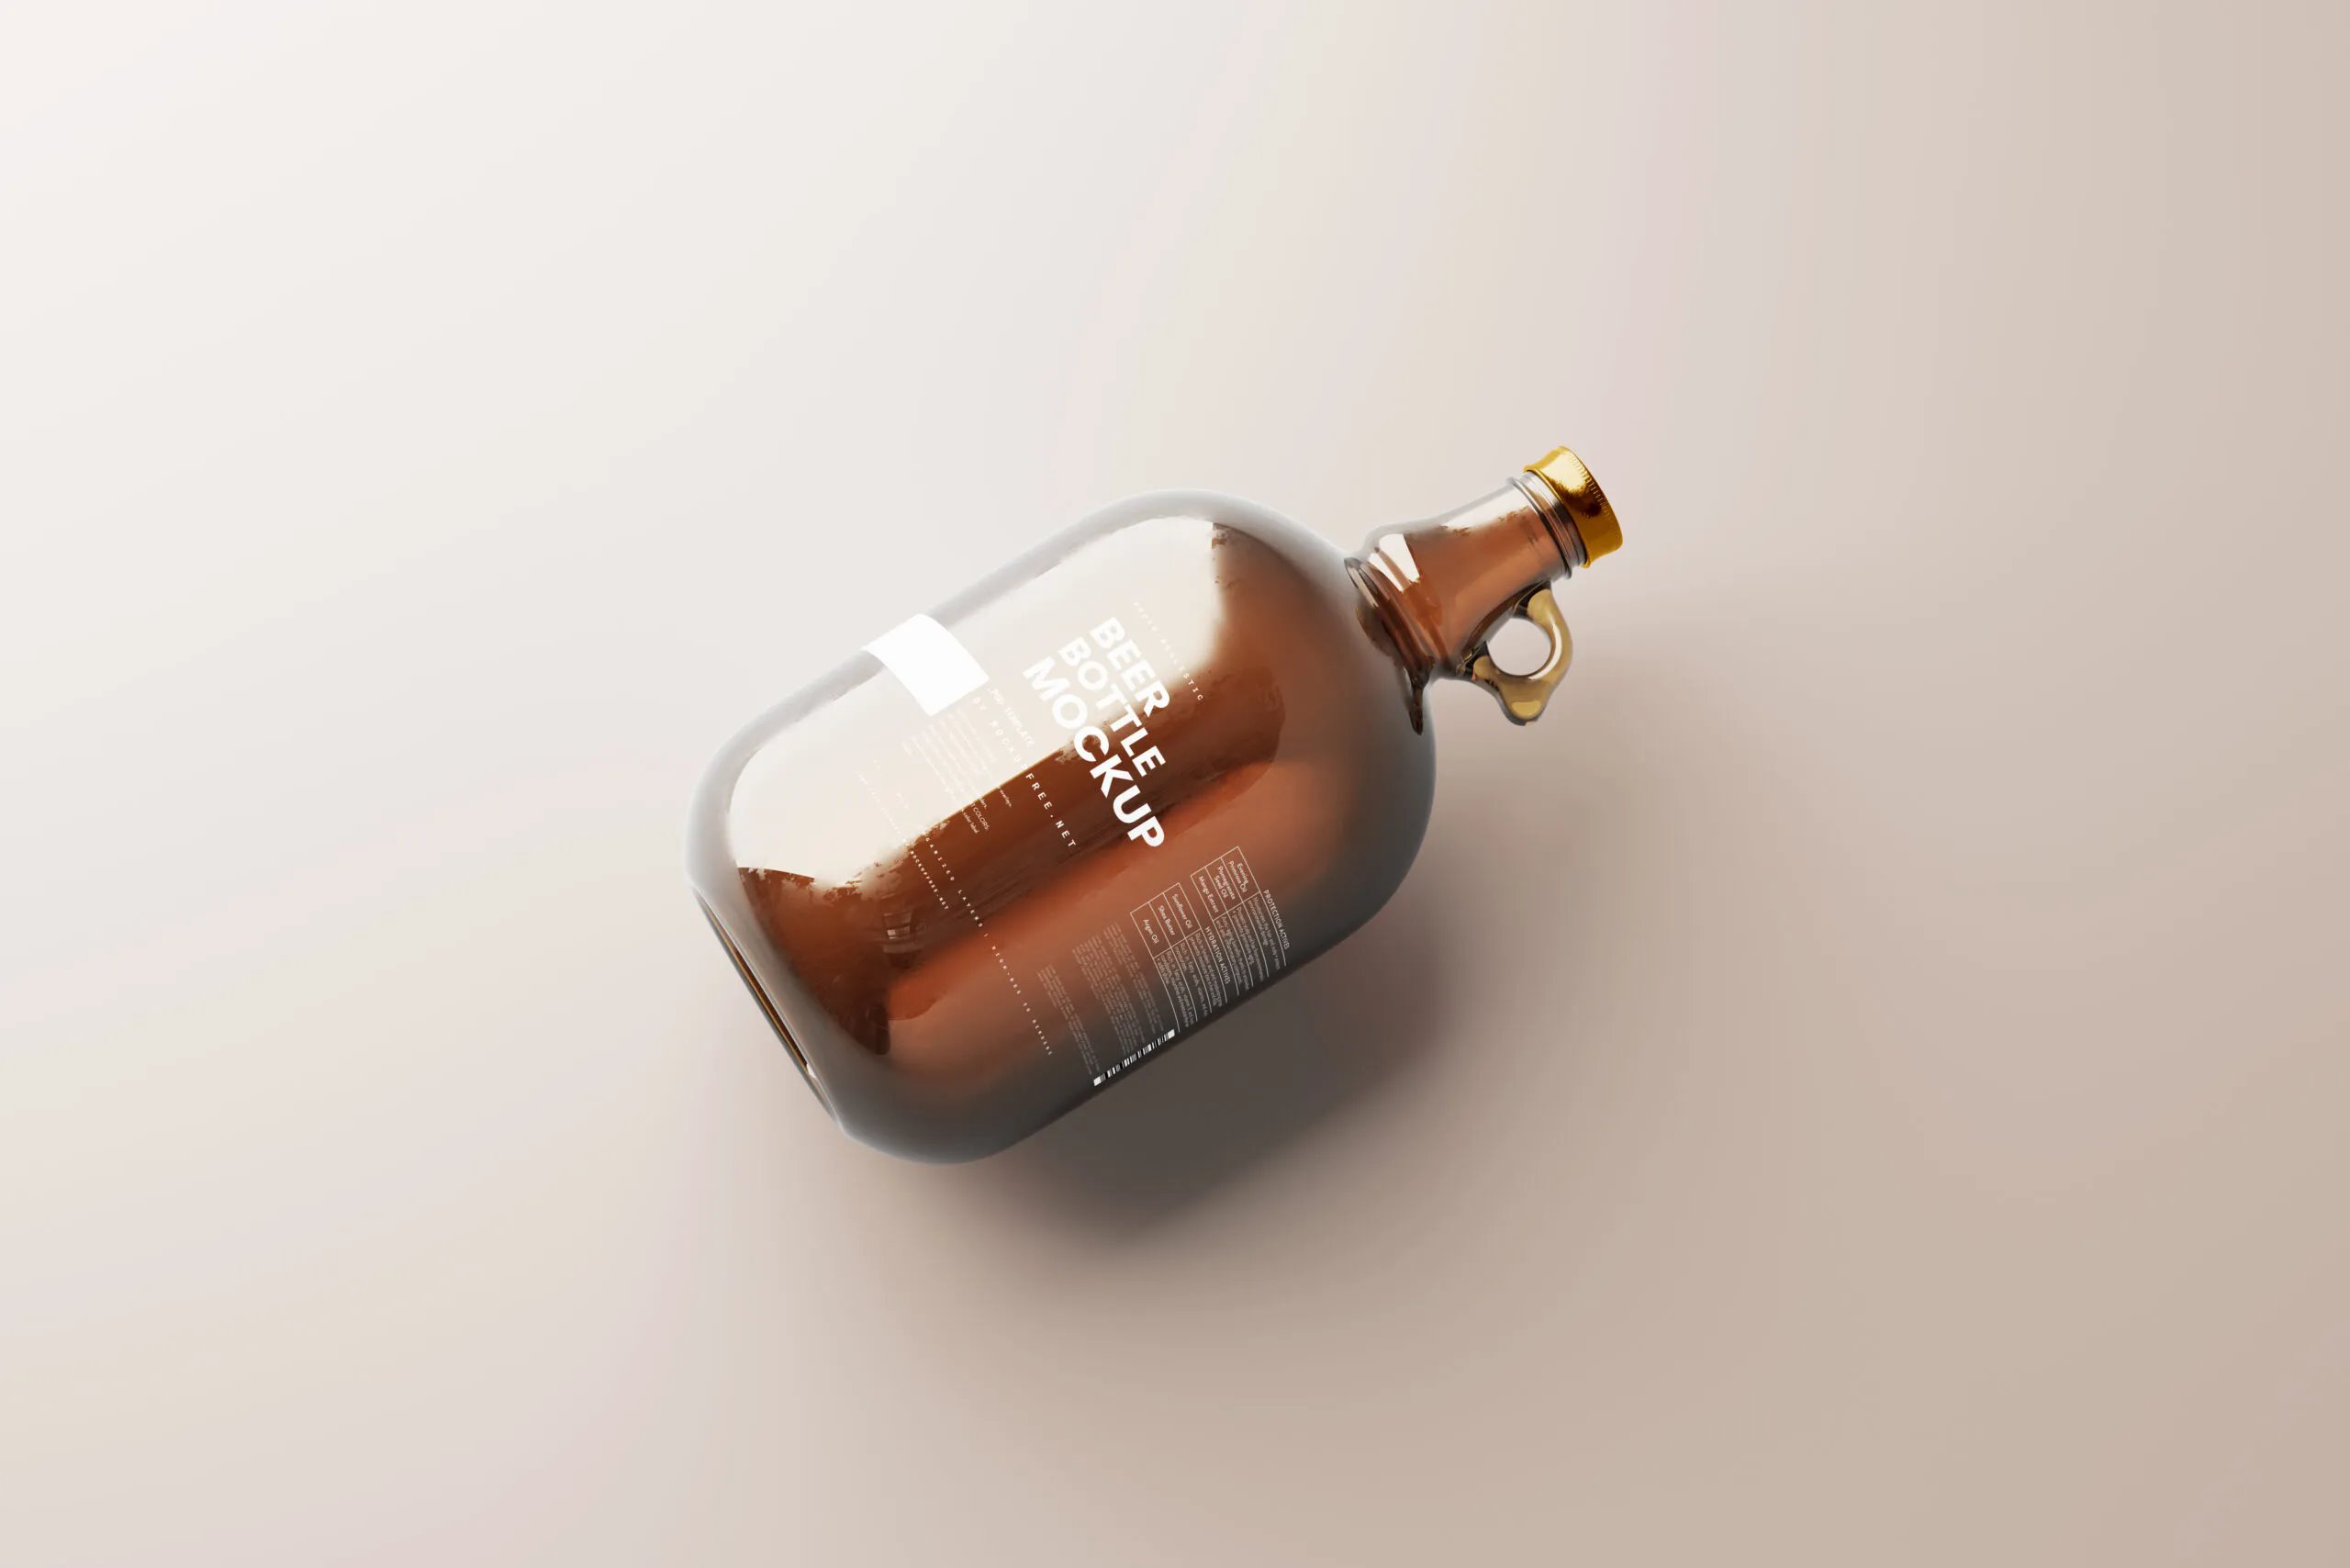 5 Shots of Amber Glass Beer Bottle Mockup with Handle FREE PSD